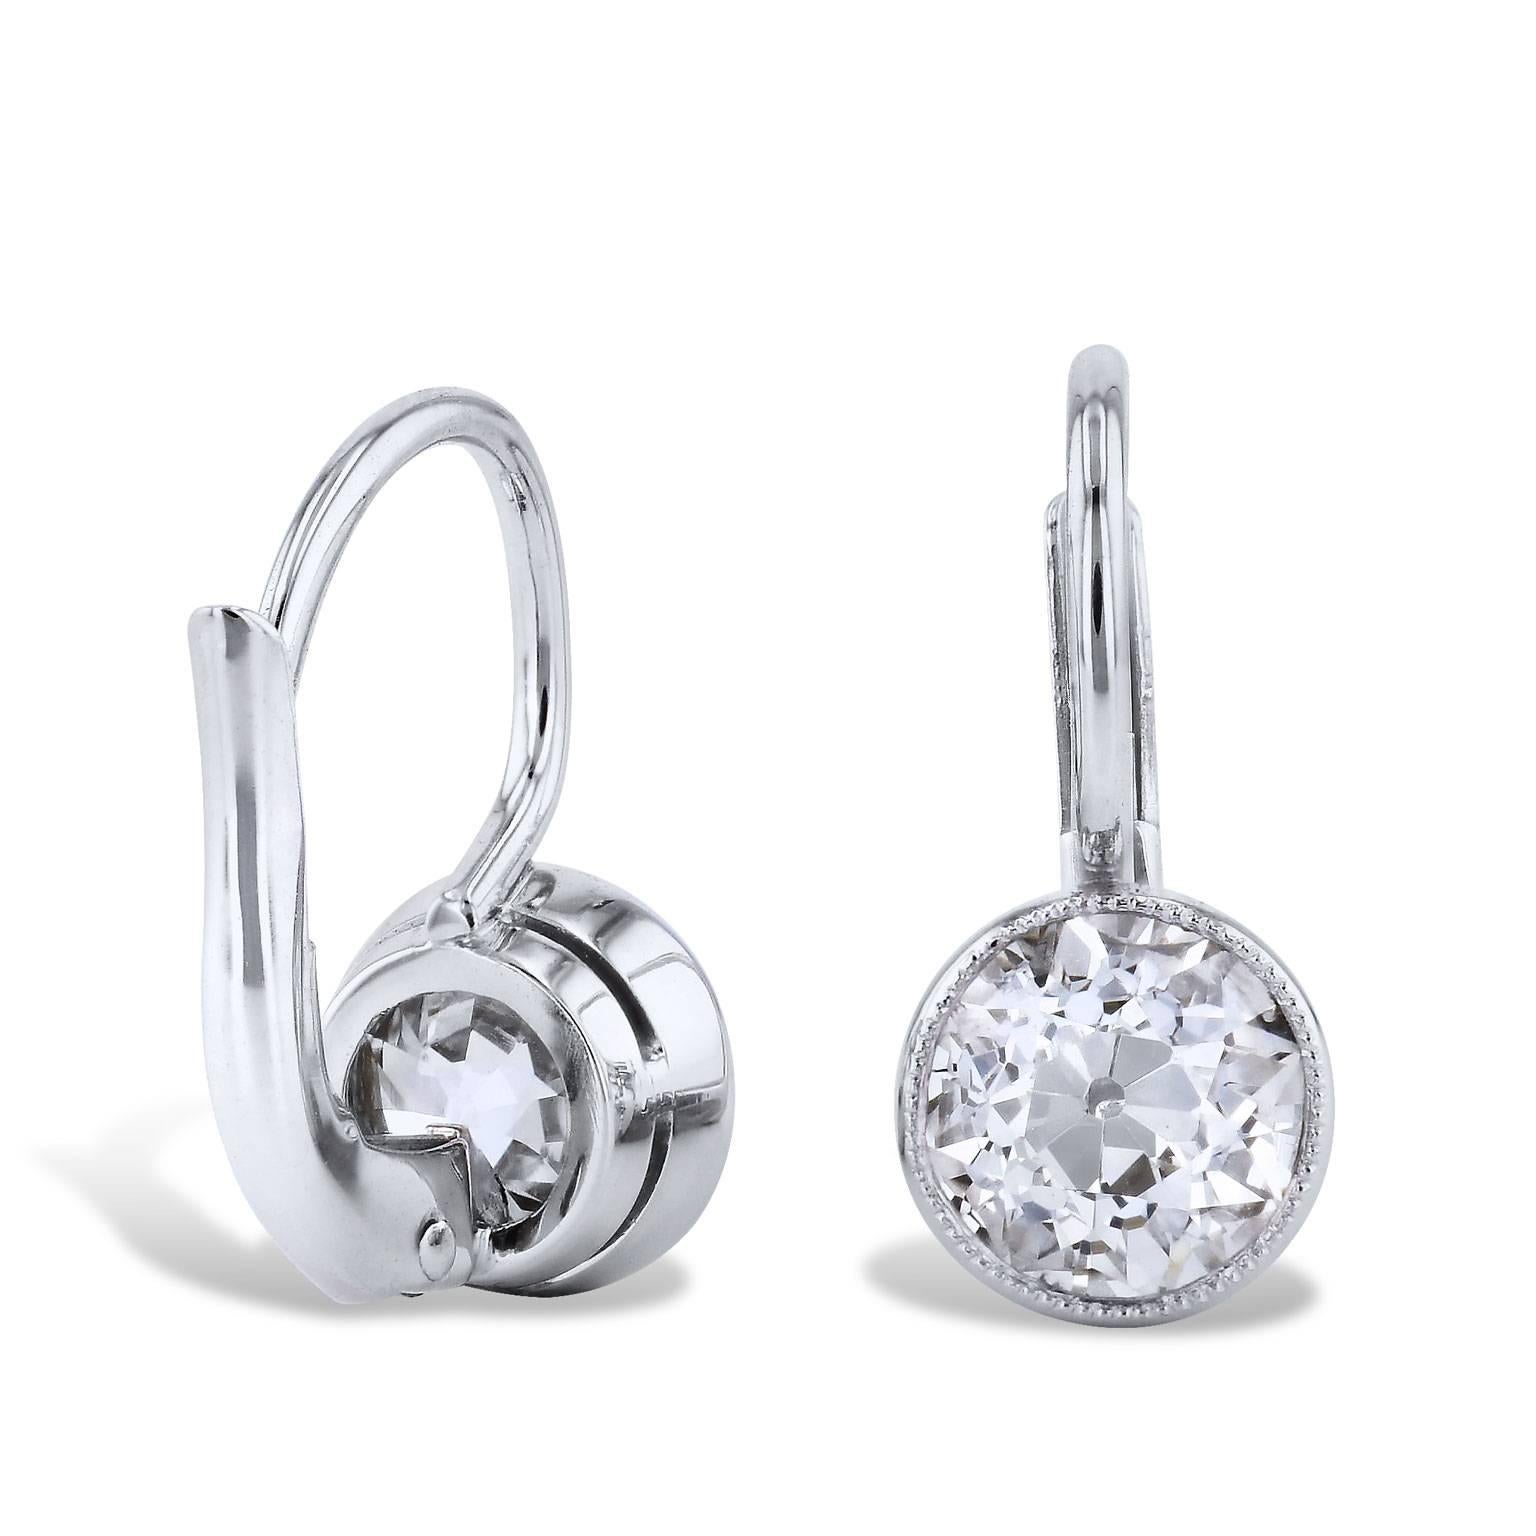 These swank handmade earrings epitomize elegance and are essential for the woman who likes a little glamour. Two diamonds with a total weight of 1.59 carat (K/L/VS) are bezel- set and fashioned in platinum. These lever-back earrings endure.